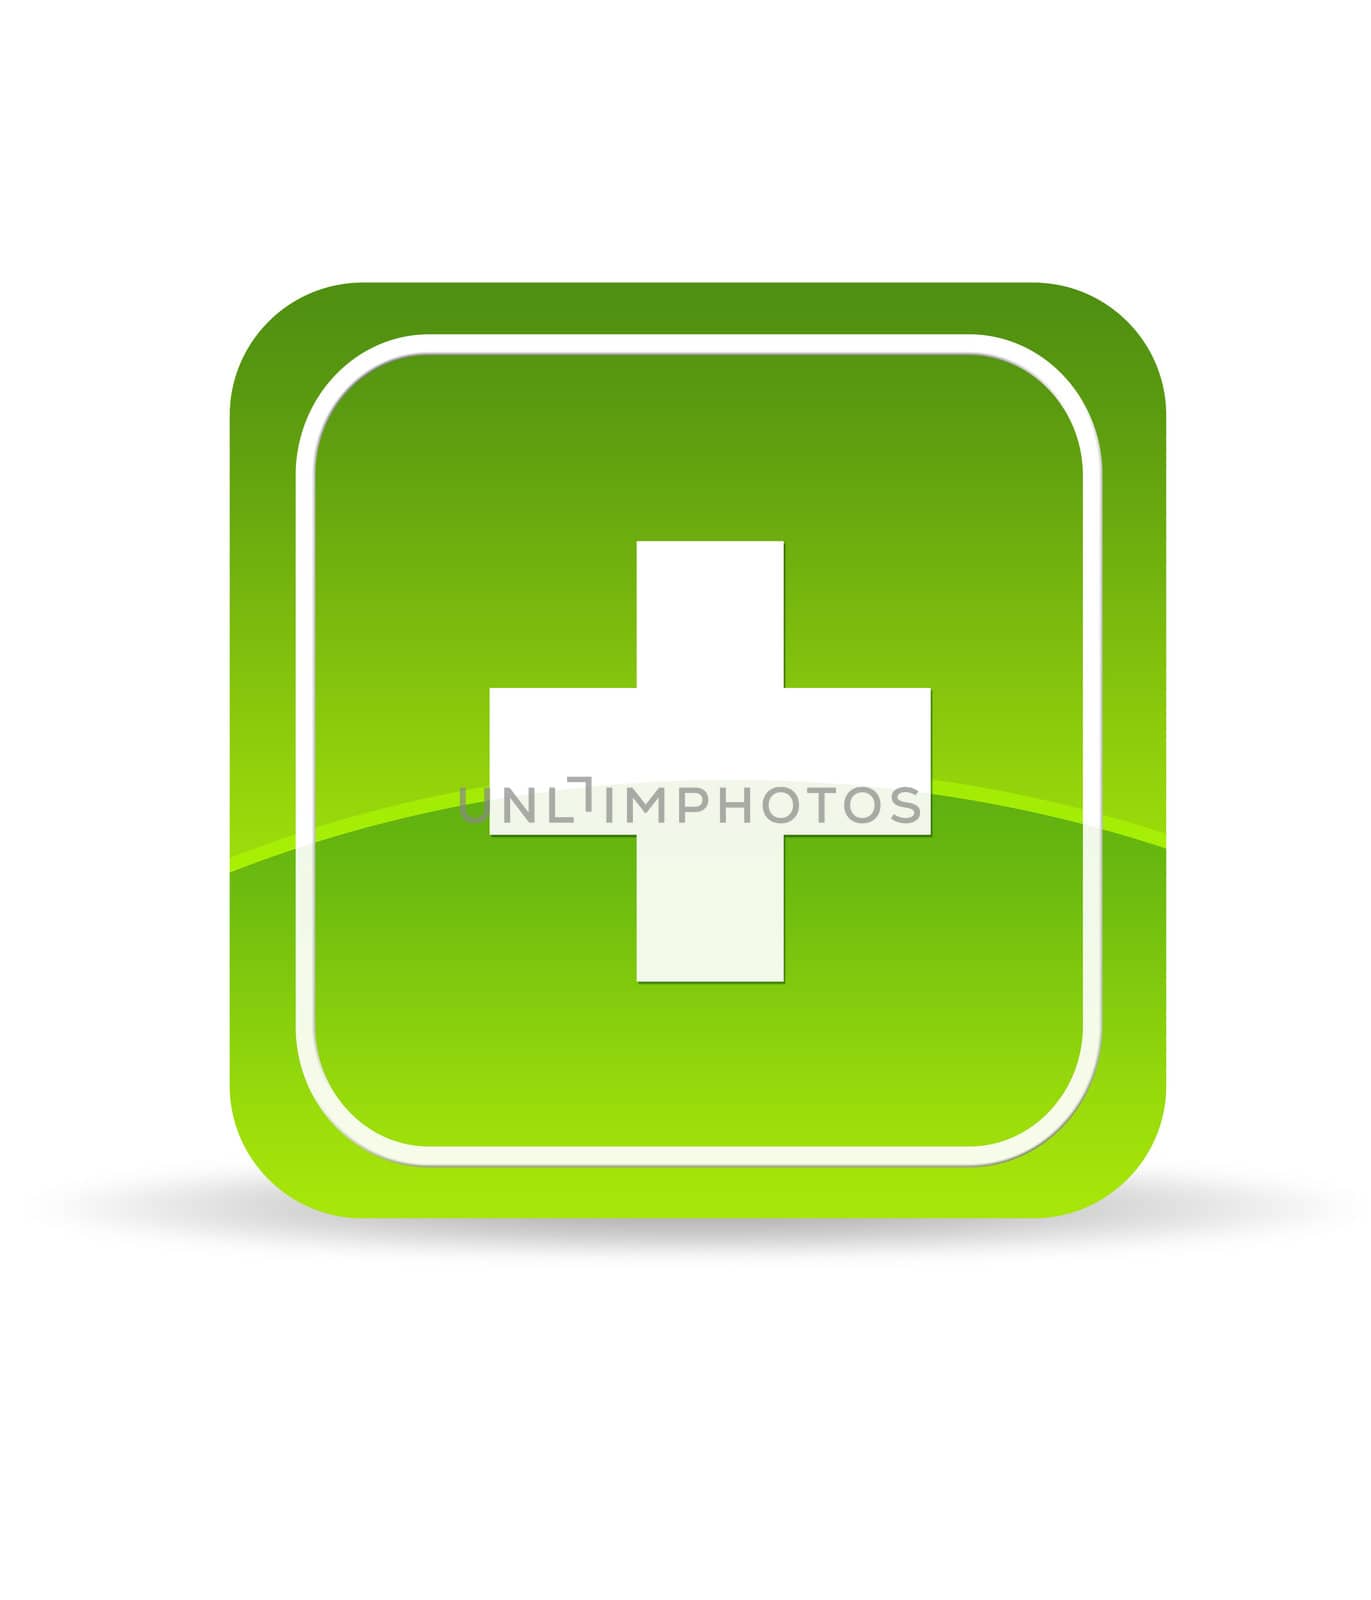 High resolution green plus icon on white background.